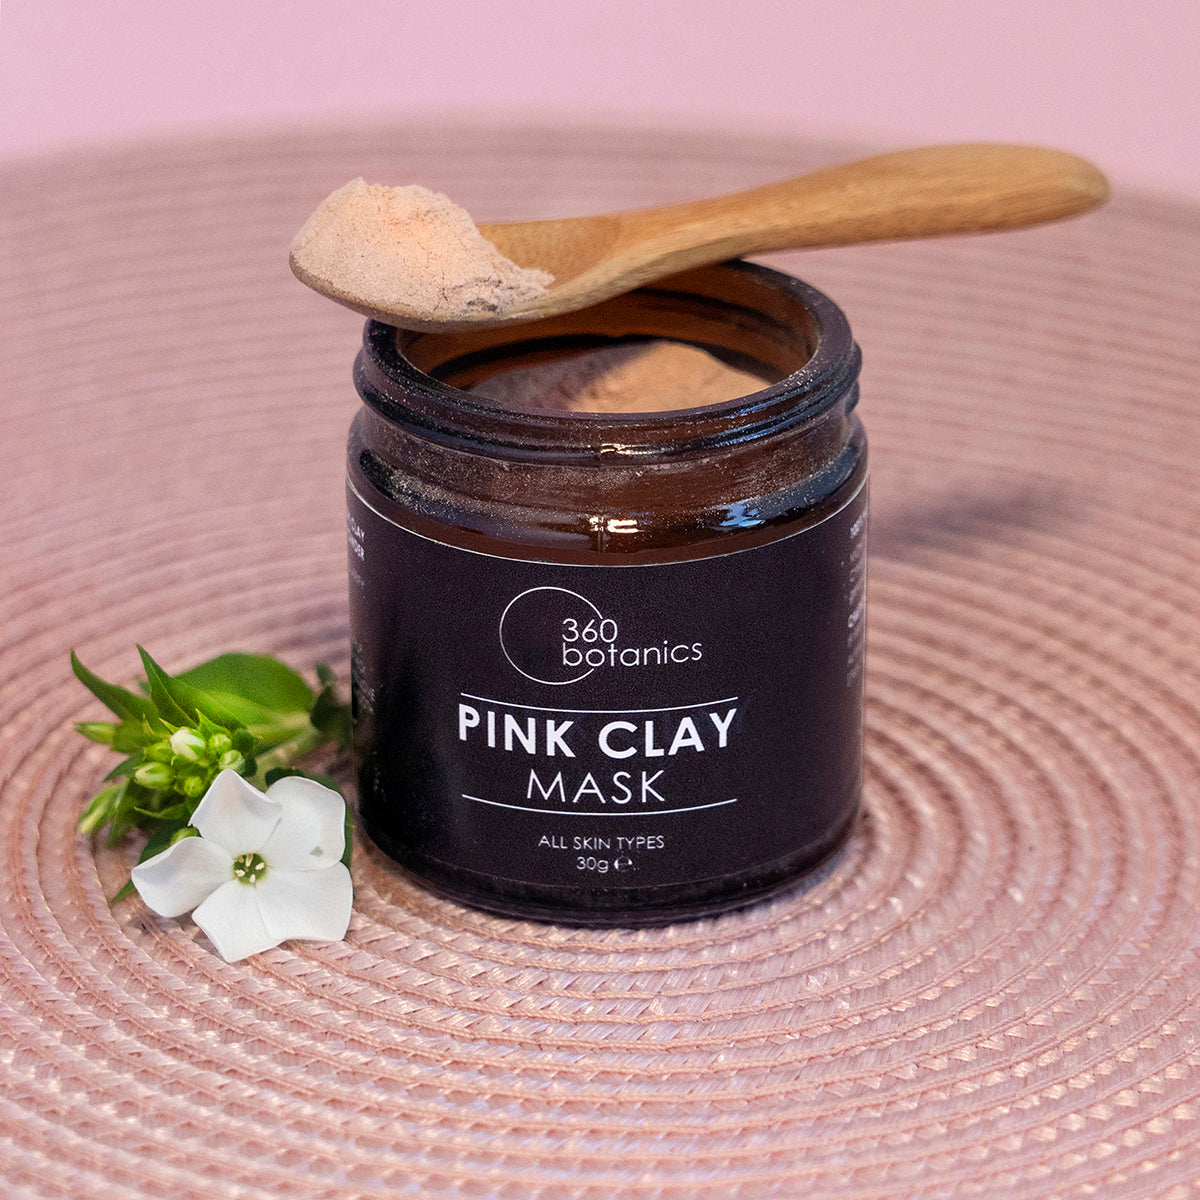 An open jar of 360 Botanics Pink Clay Mask is presented on a textured woven mat. A wooden spoon with a scoop of the fine pink clay powder rests on top, while a delicate white flower with green leaves adds a natural touch to the scene, emphasizing the organic beauty product suitable for all skin types